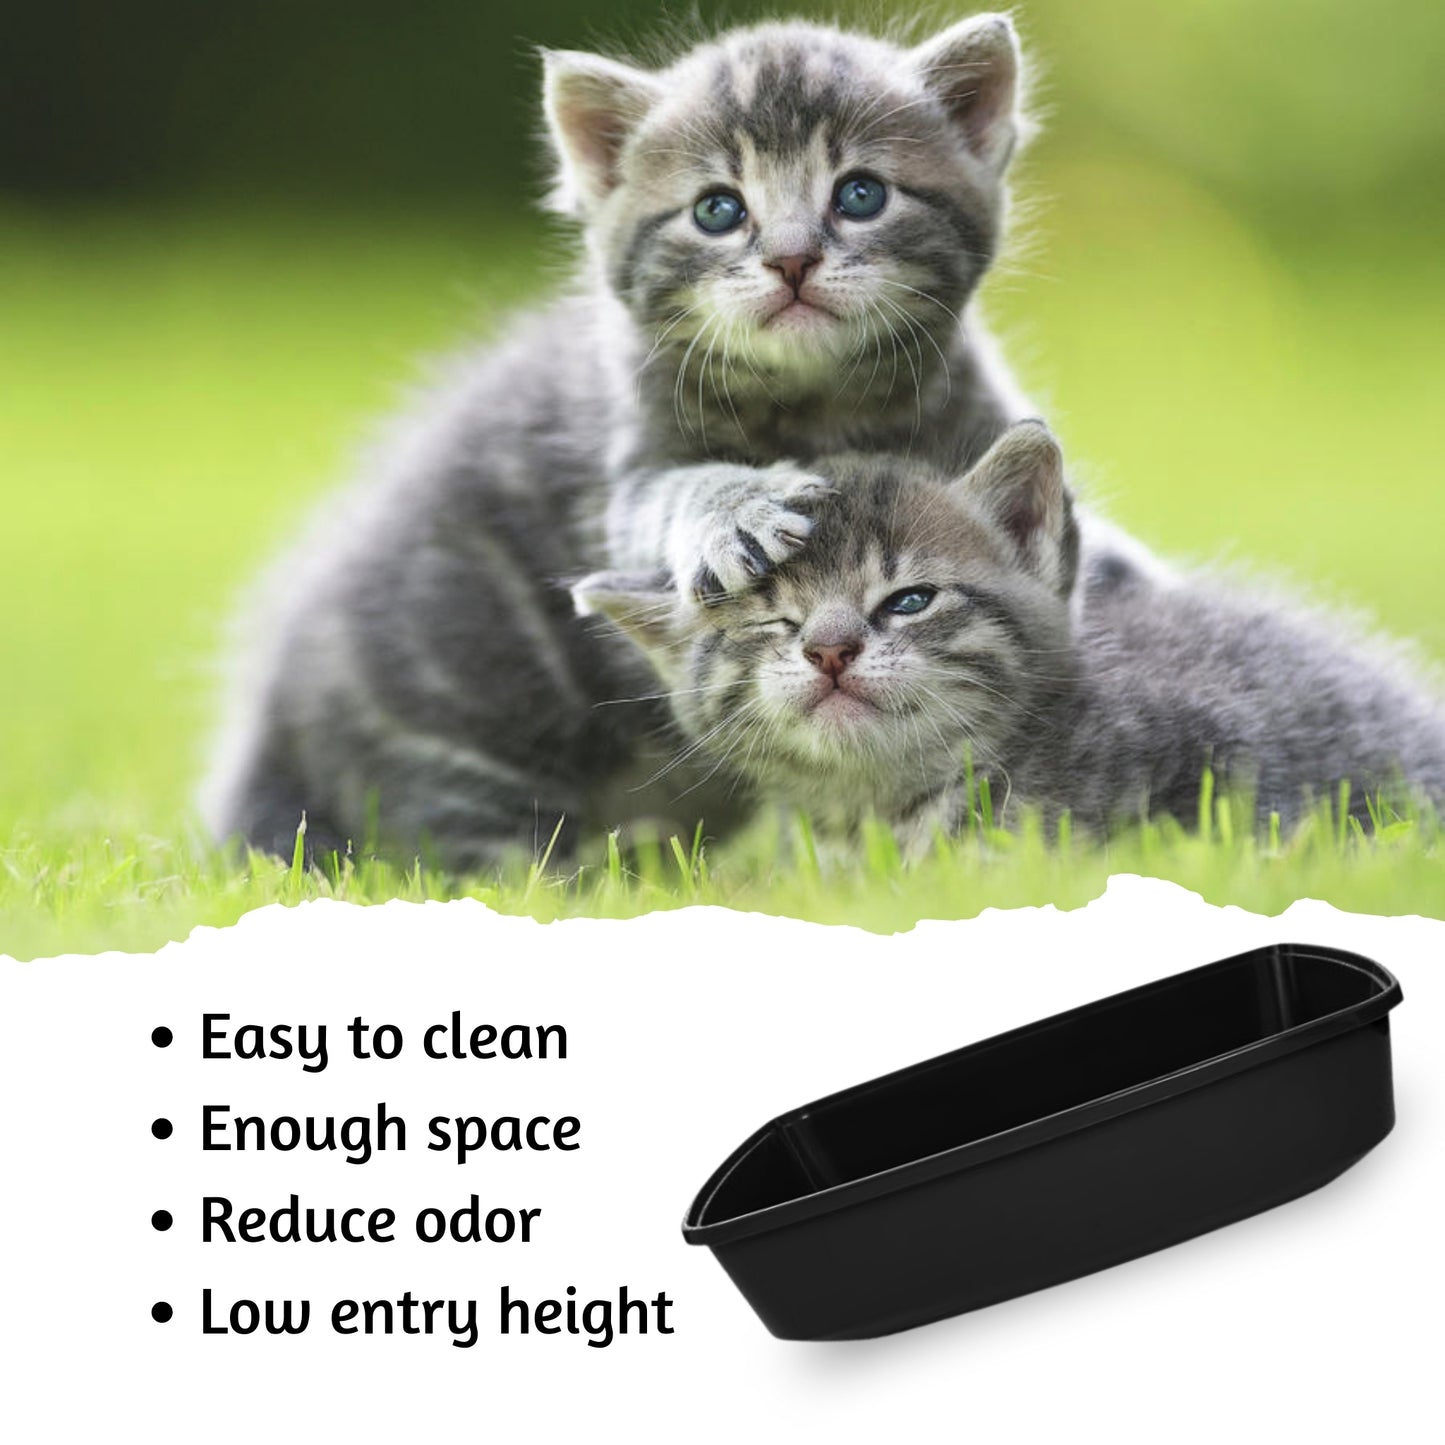 Foodie Puppies Cat Litter Tray for Small Cat and Kitten - Black, Large